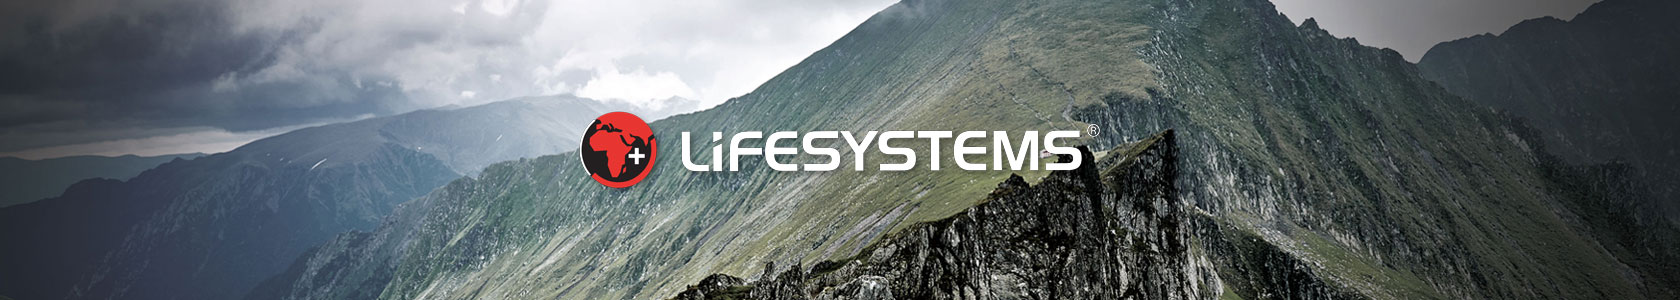 Lifesystems logo and a cliff edge in the background